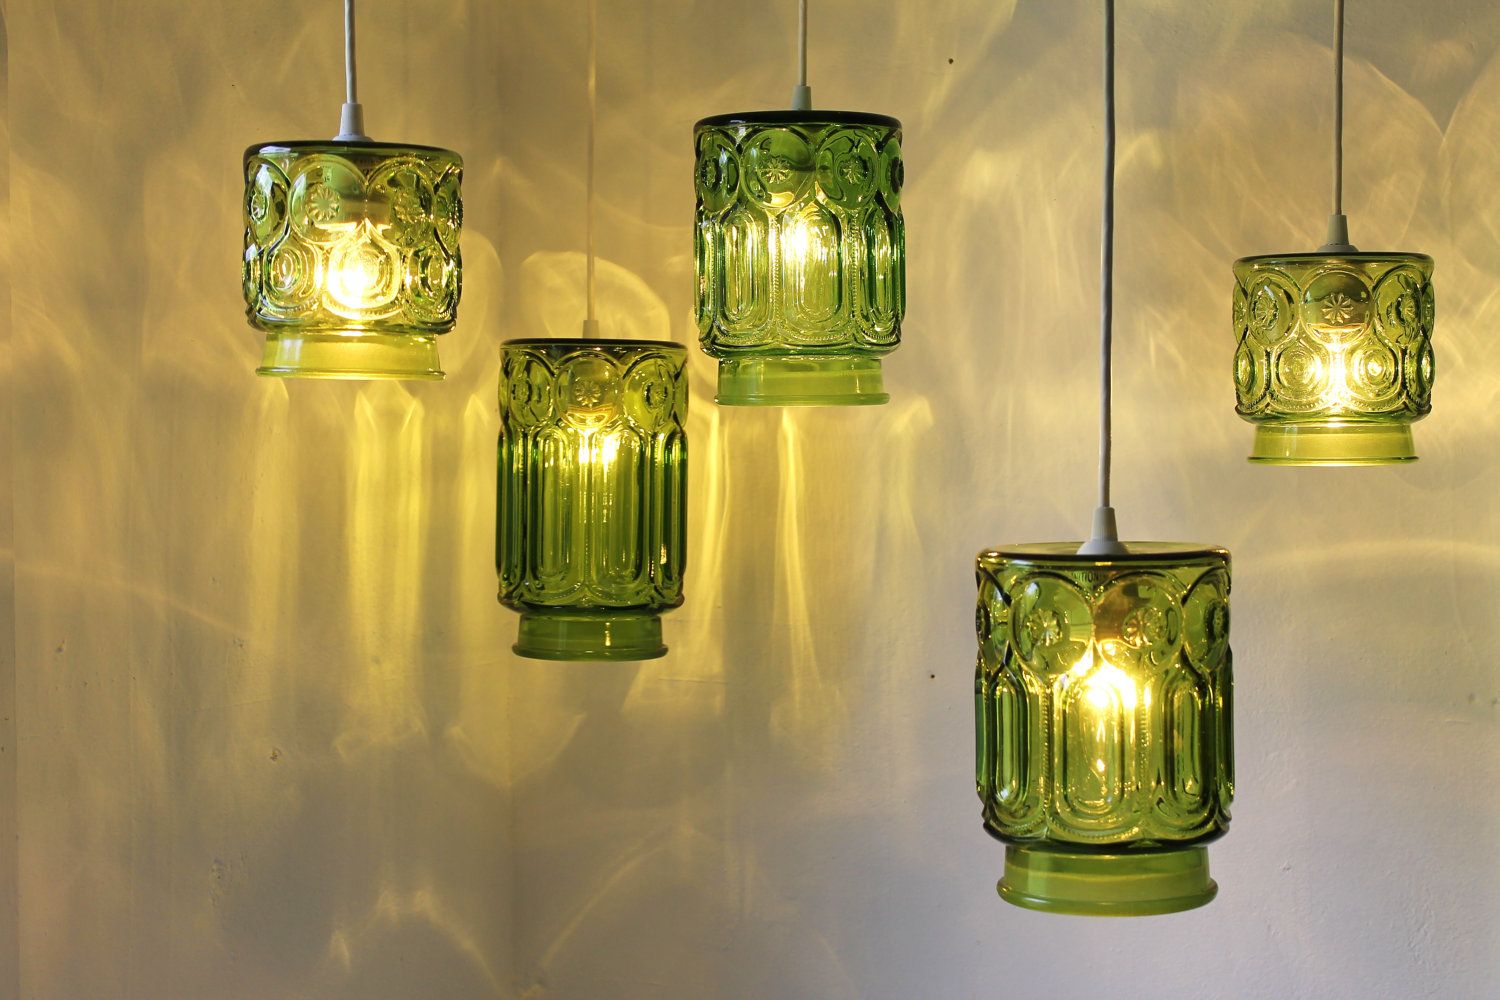 eco friendly lamps to decorate your home